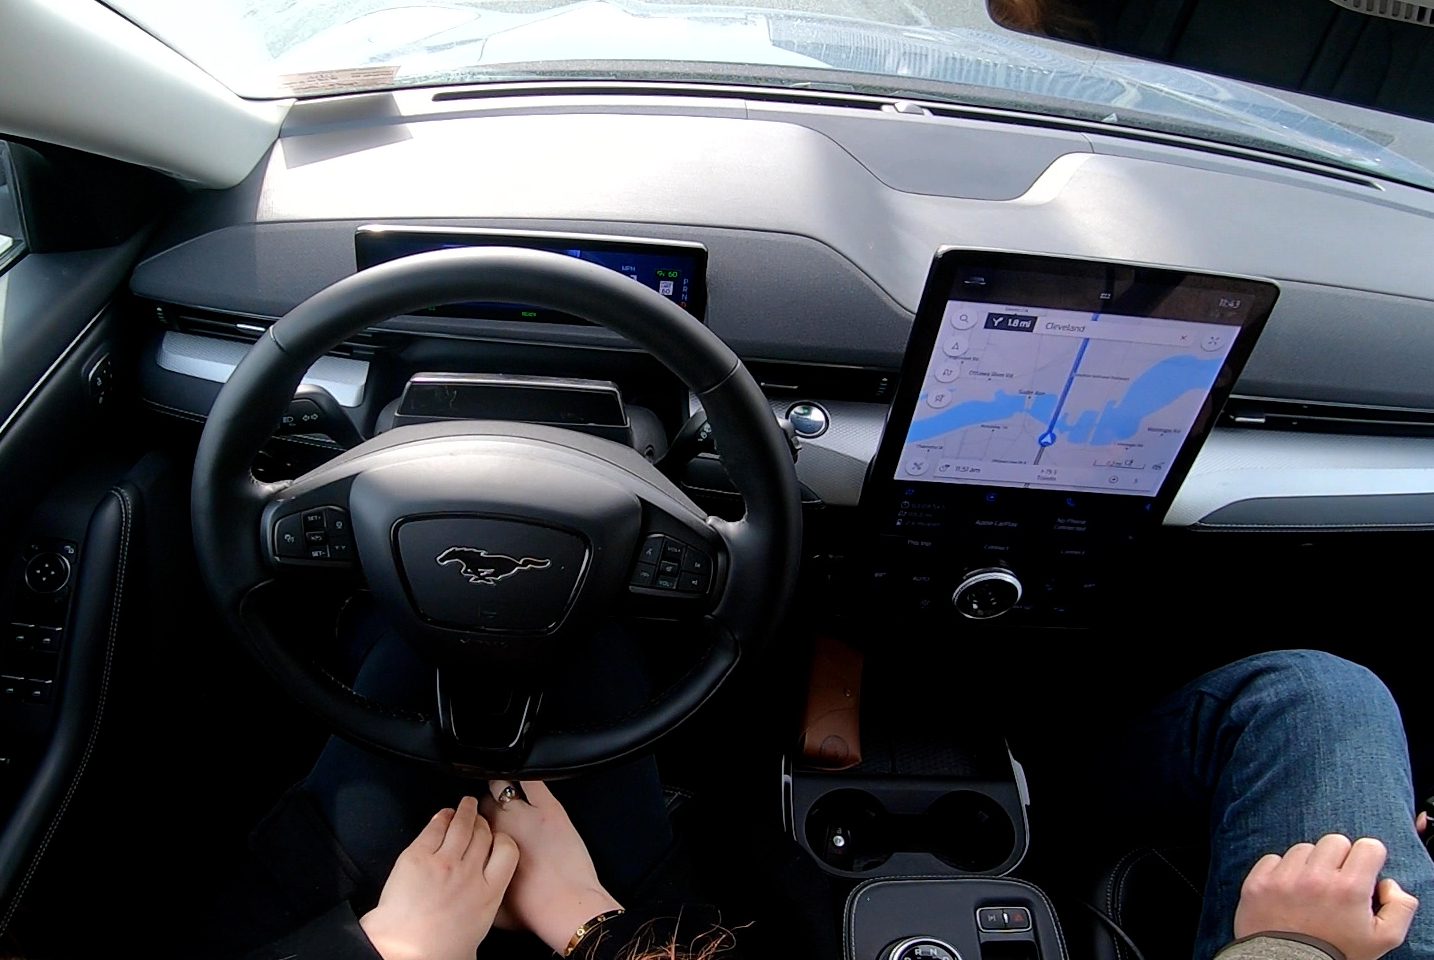 Ford shows BlueCruise hands-free driving while CEO Farley takes jab at Tesla